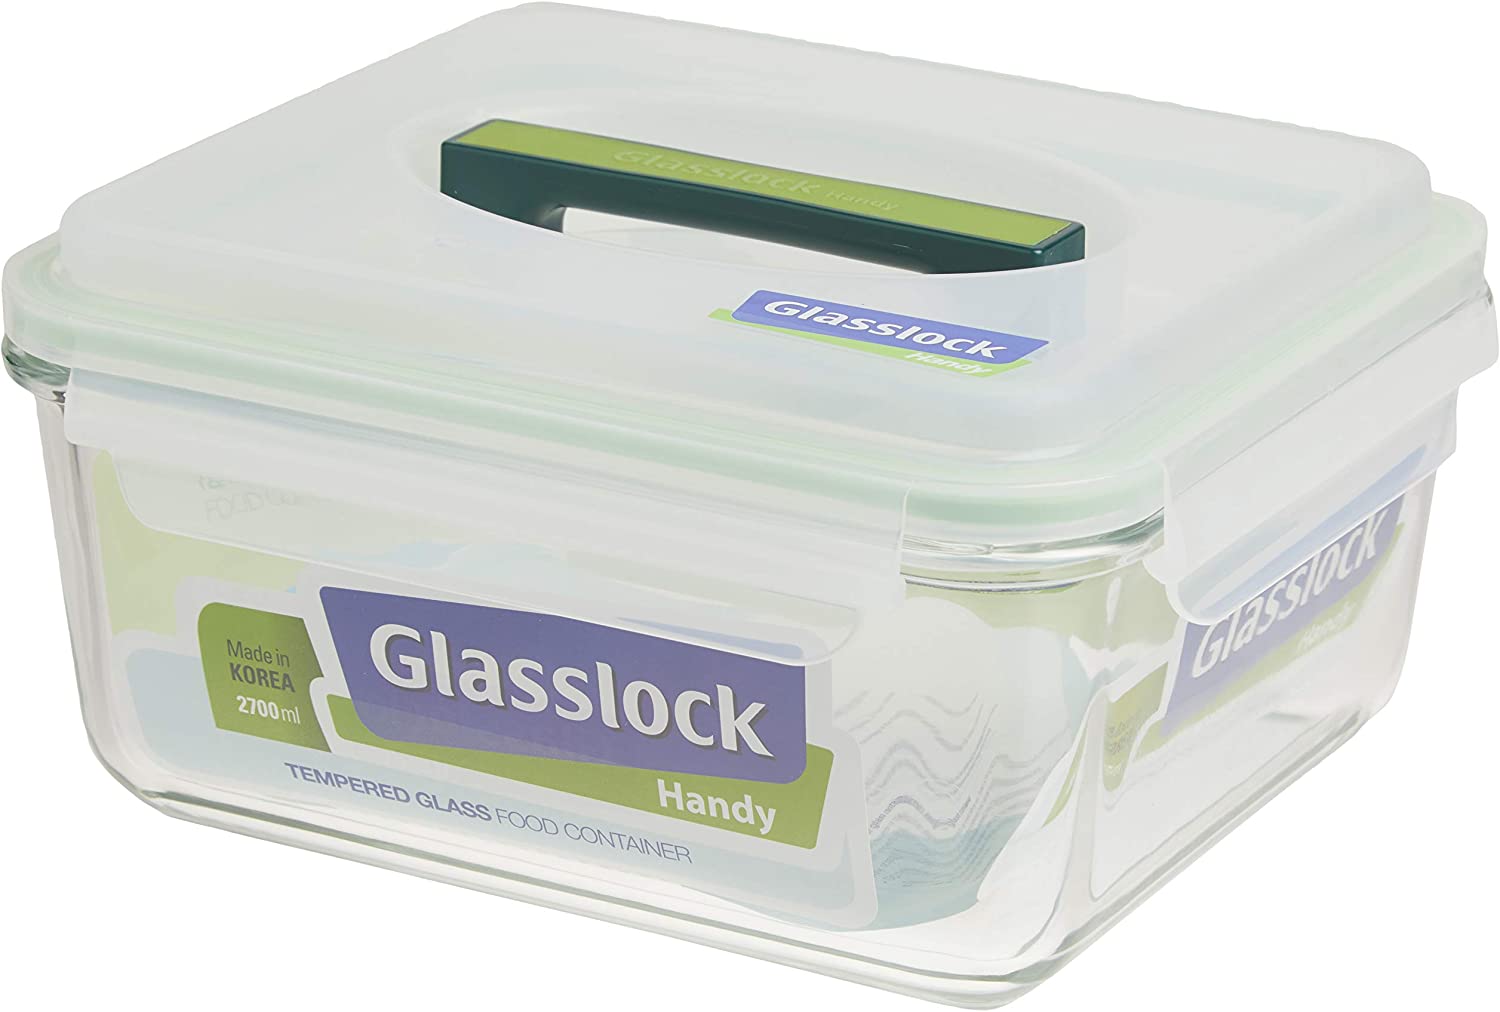 Glasslock 11.4-Cup Rectangle Handy Container